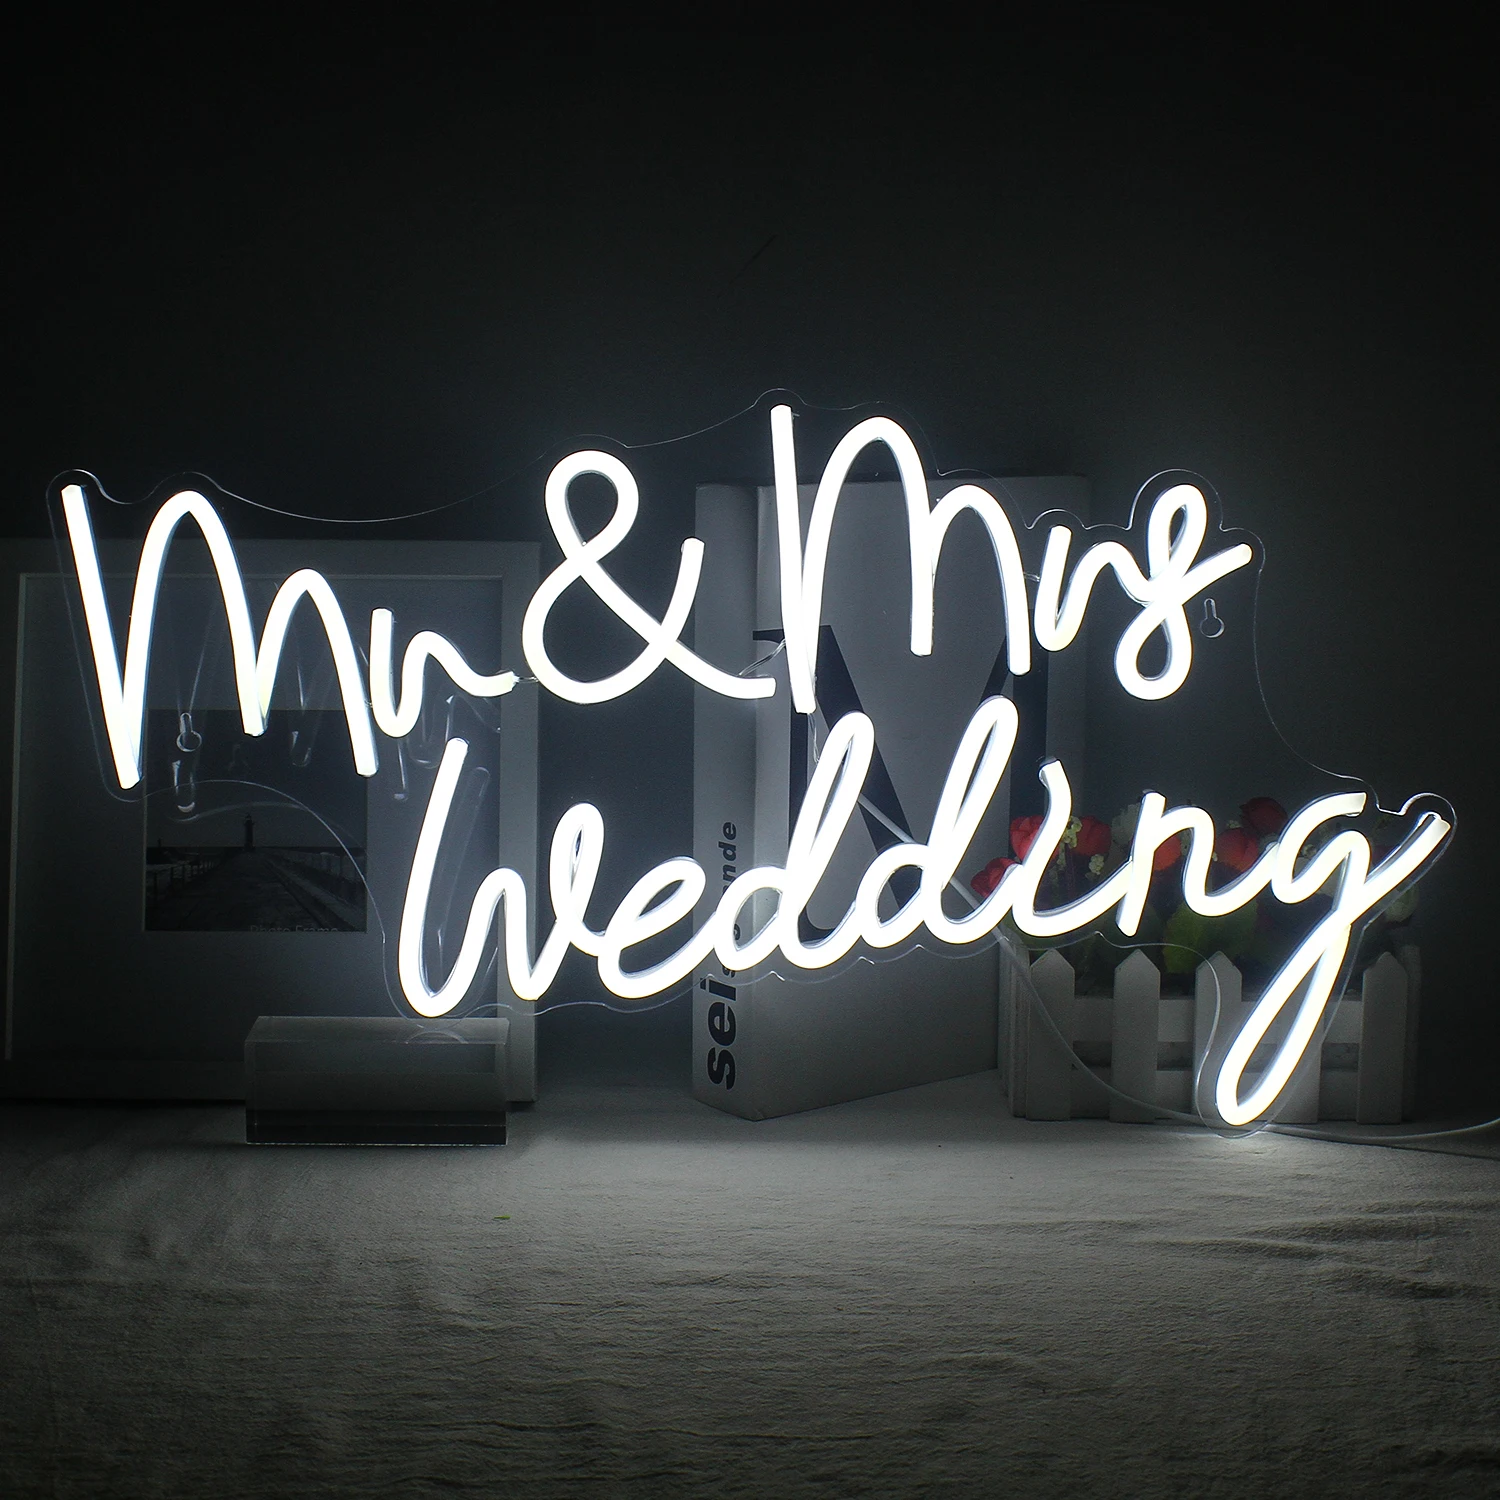 

Mr&Mrs Wedding Neon Led Sign Art Letter Lights Wedding Room Decoration USB Powered Neon Wall Lamp For Marriage Festa Party Logo